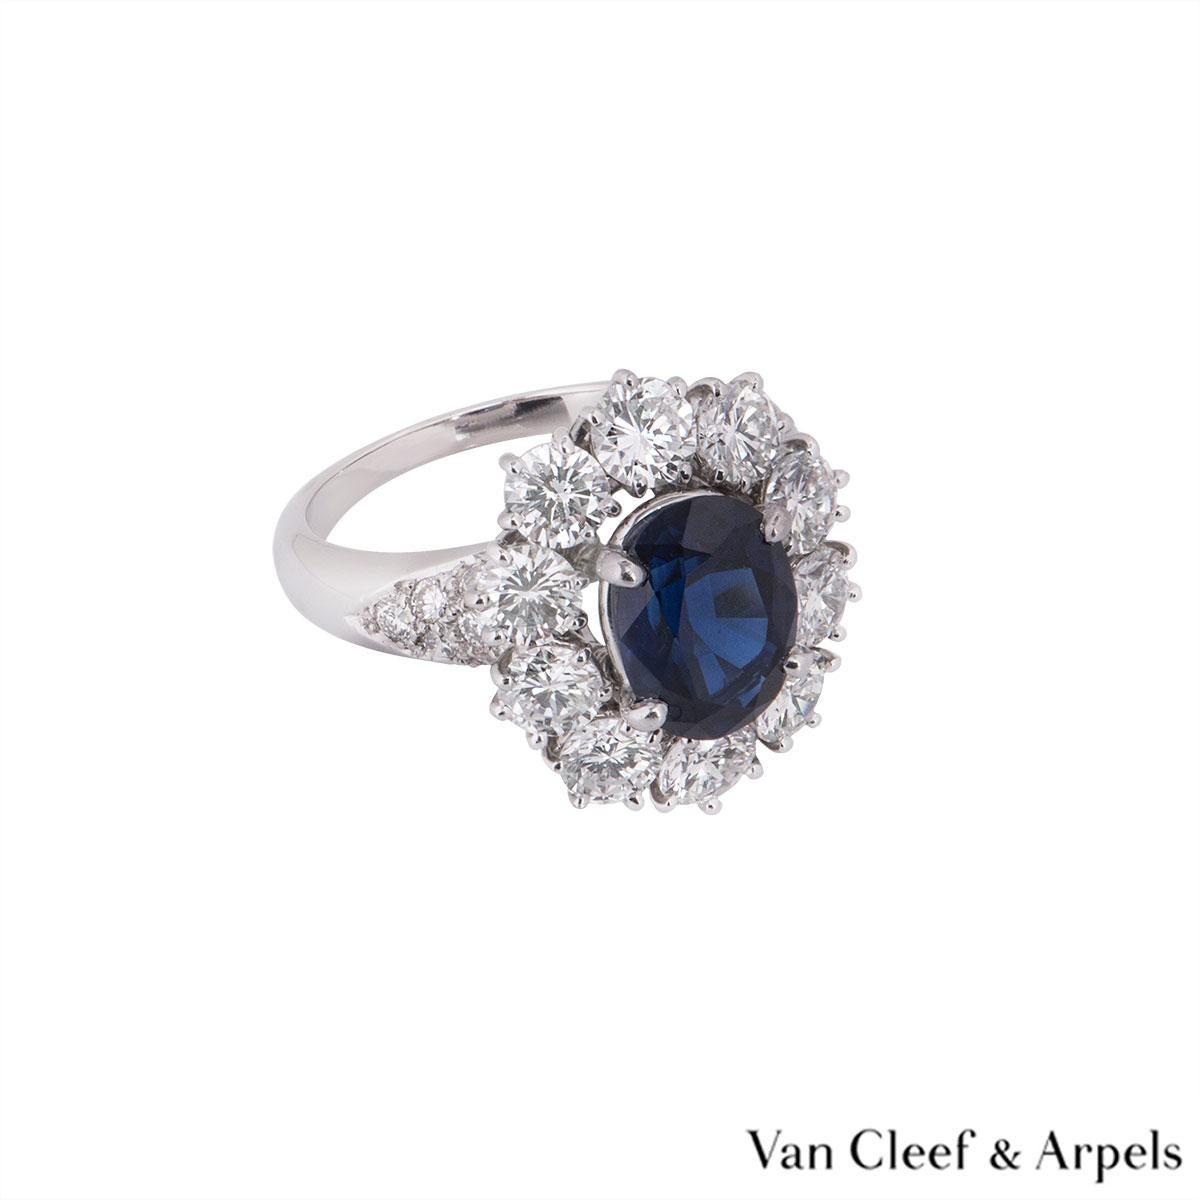 Van Cleef & Arpels Sapphire and Diamond Engagement Cocktail Ring GIA Certified 1